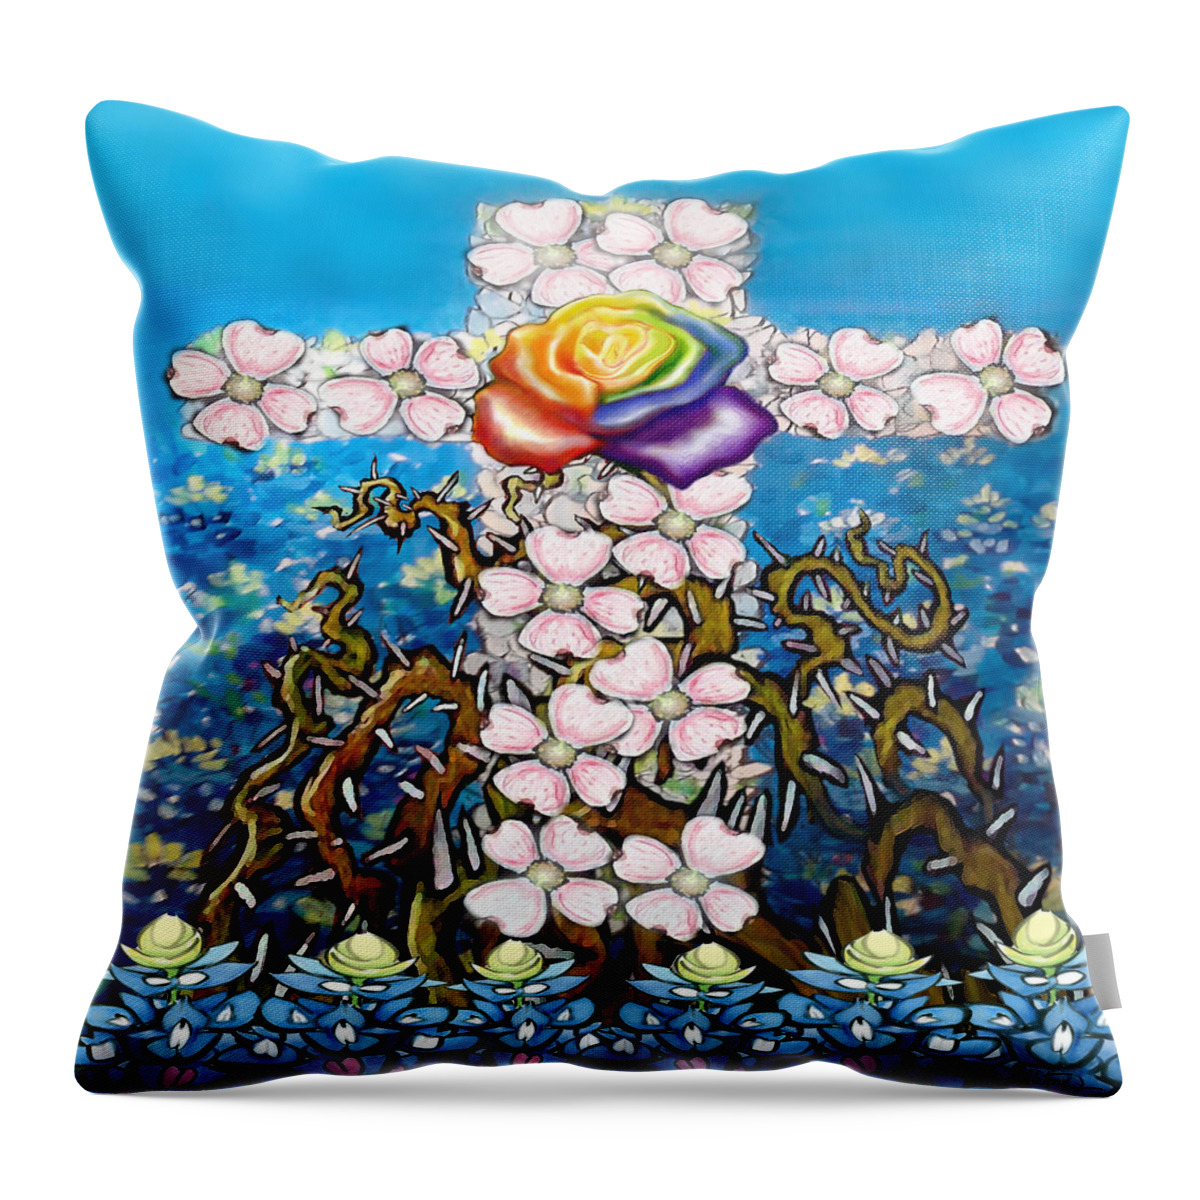 Floral Throw Pillow featuring the painting Floral Cross Rainbow Rose by Kevin Middleton